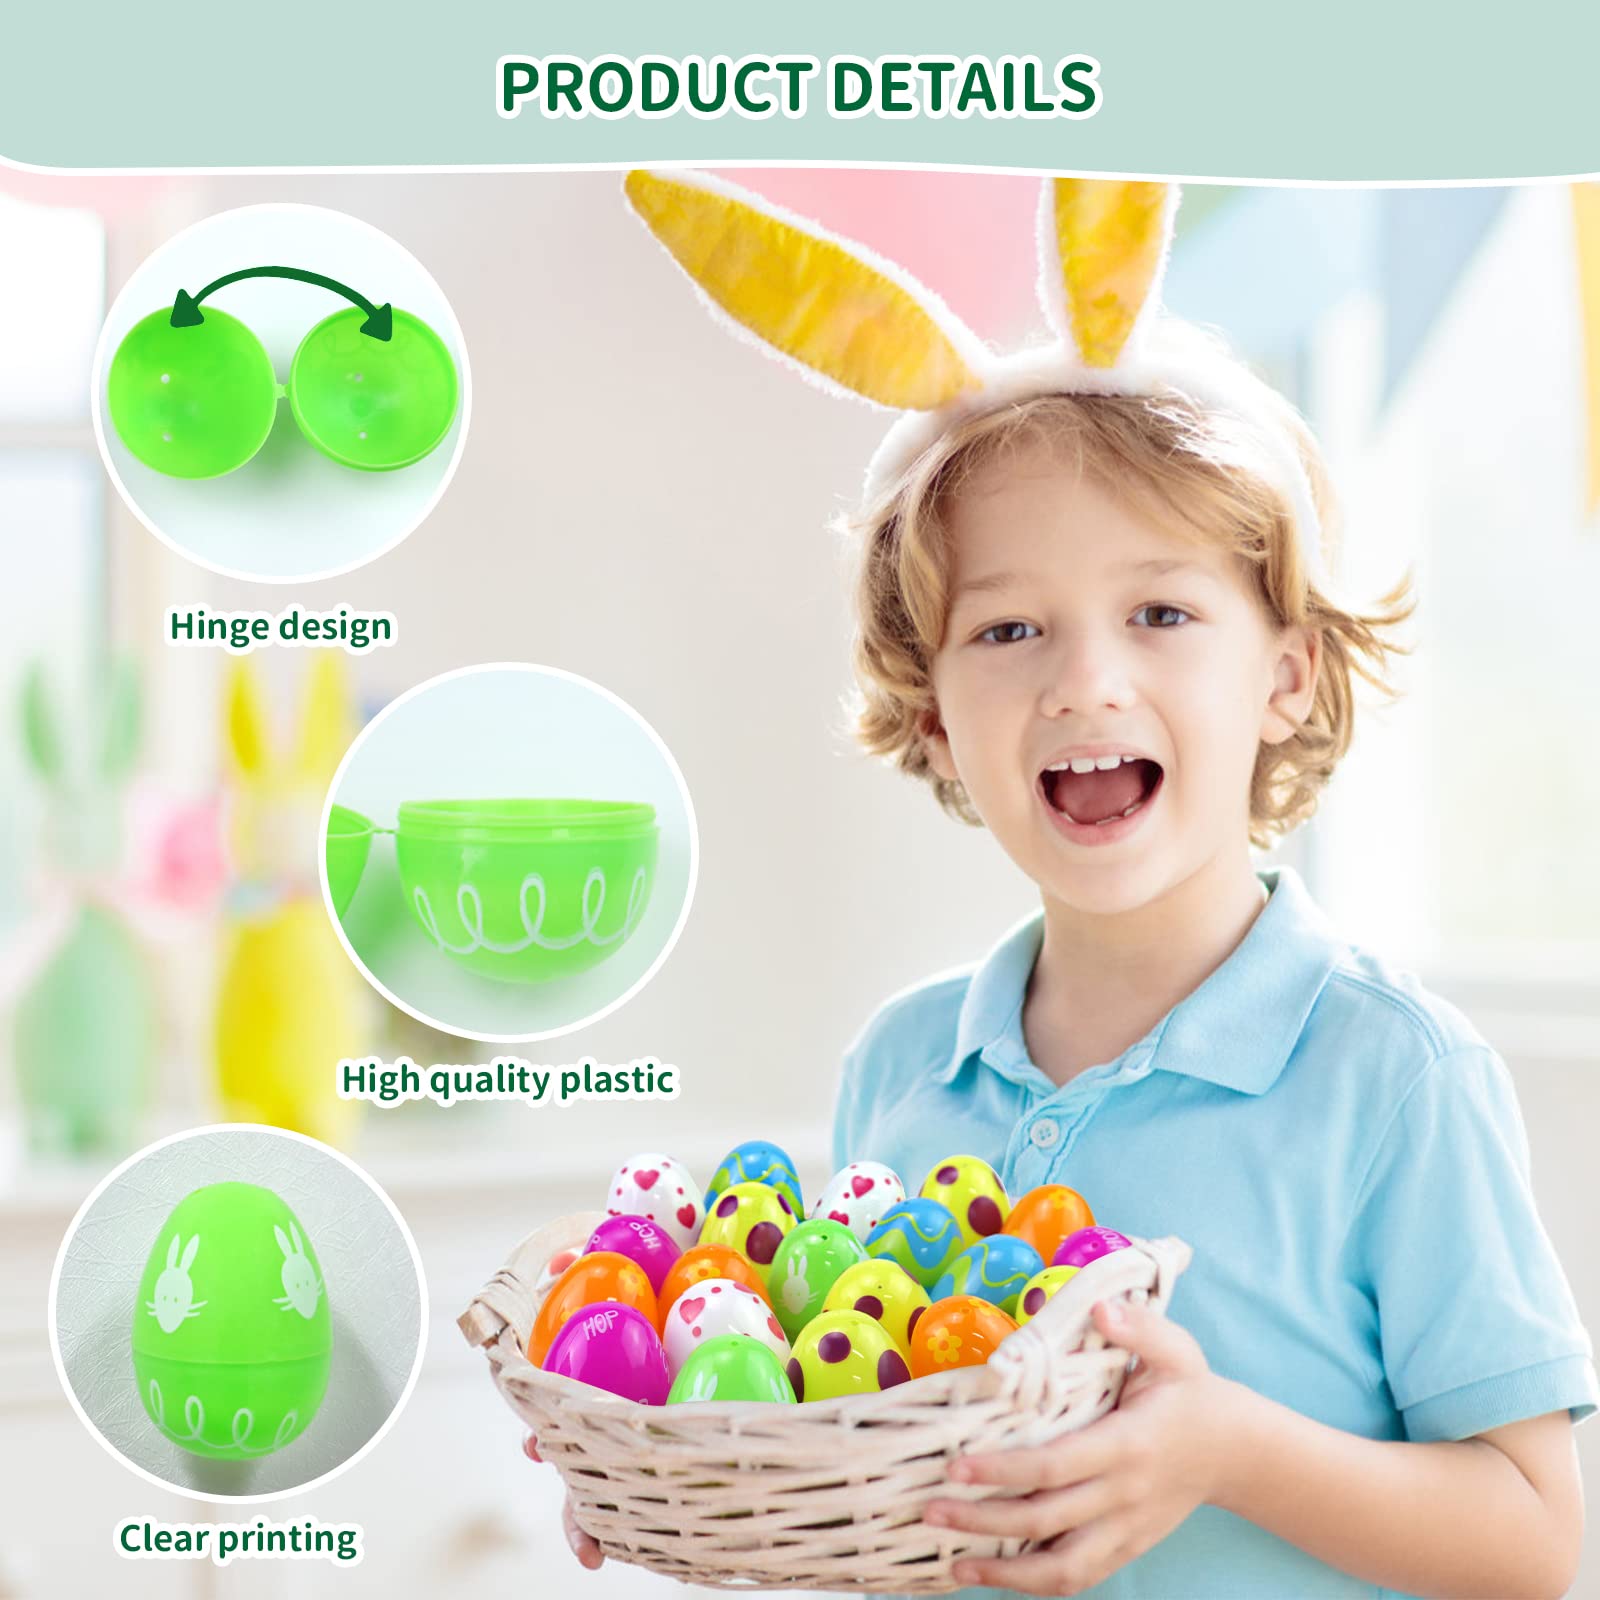 96 Pieces Empty Easter Eggs Fillable Plastic Easter Eggs,Colorful Printed Bulk Easter Eggs for Easter Egg Hunt,Easter Hunt,Easter Basket Stuffers Easter Party Favors for Kids,2.3 inch Assorted Colors